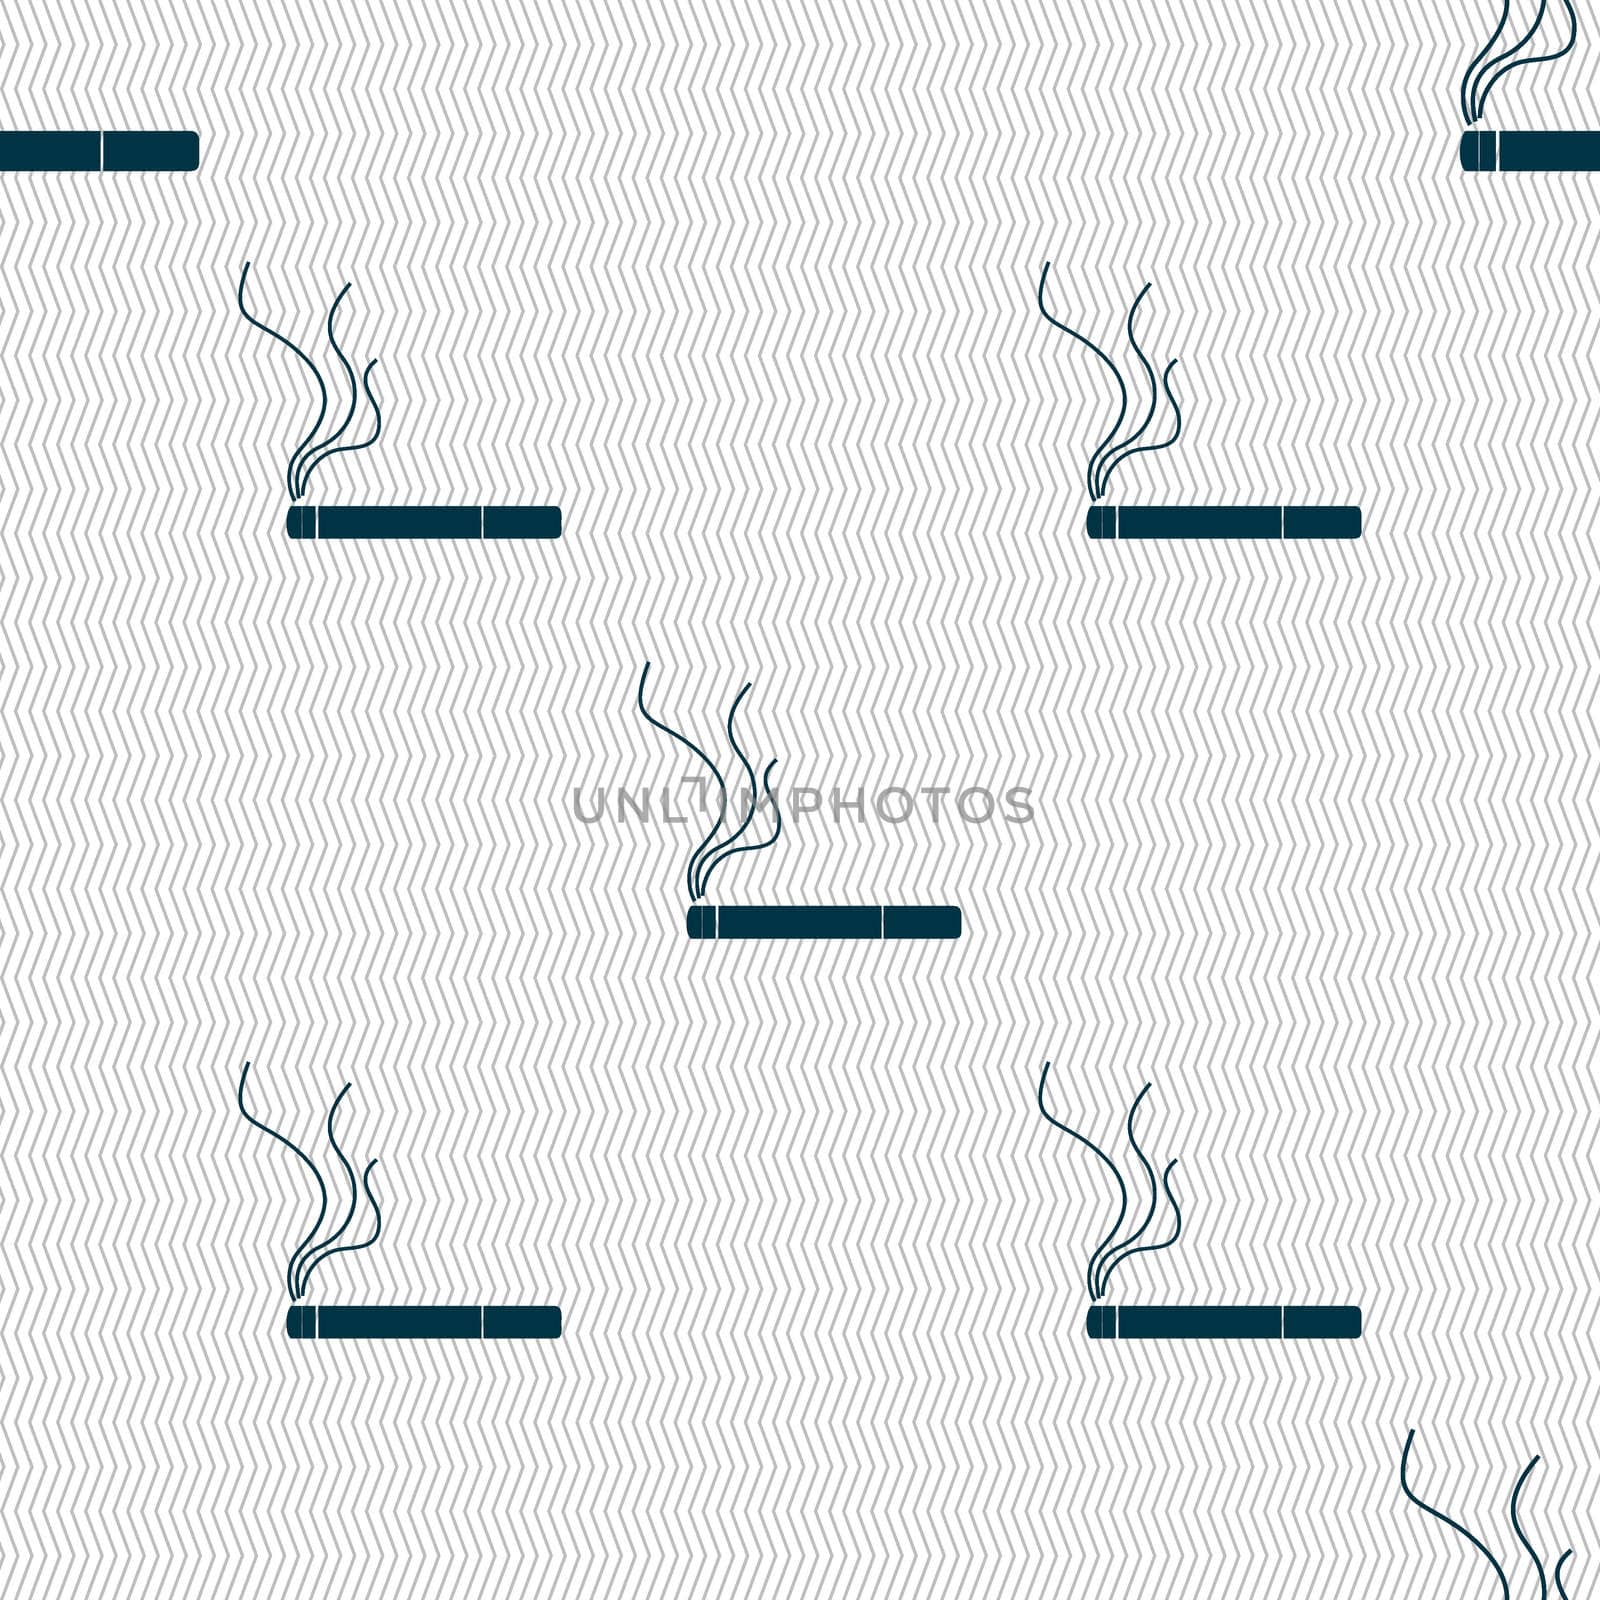 Smoking sign icon. Cigarette symbol. Seamless abstract background with geometric shapes. illustration